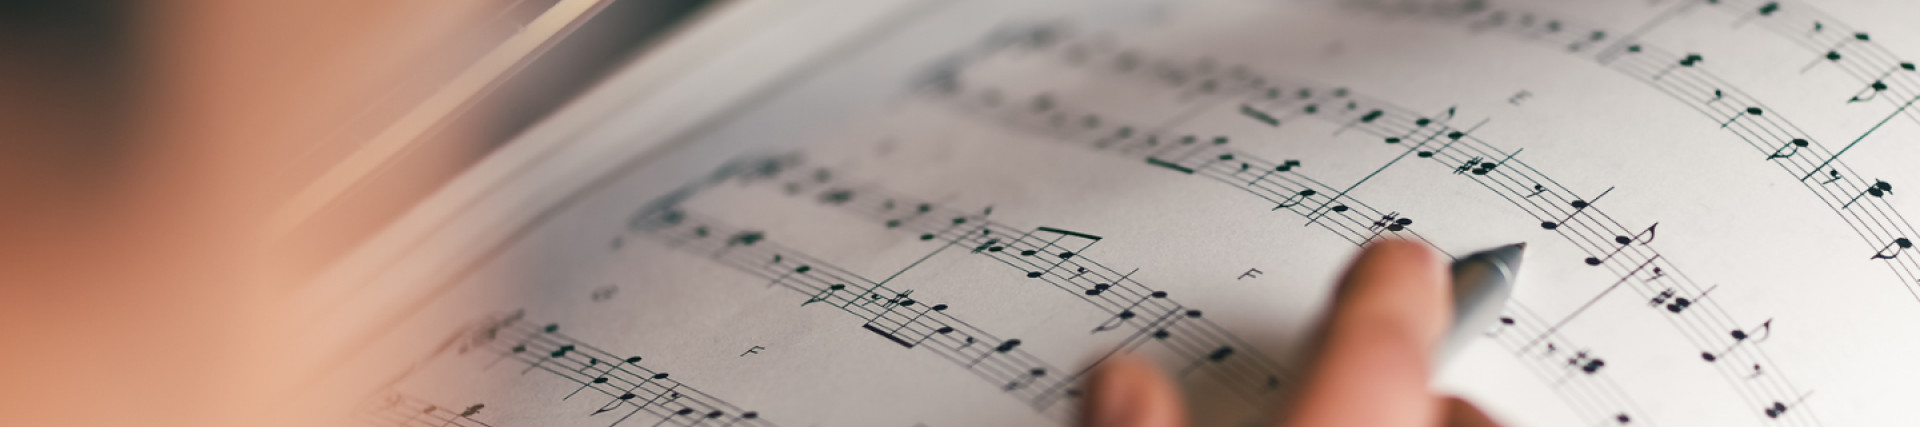 Student composes music on a manuscript